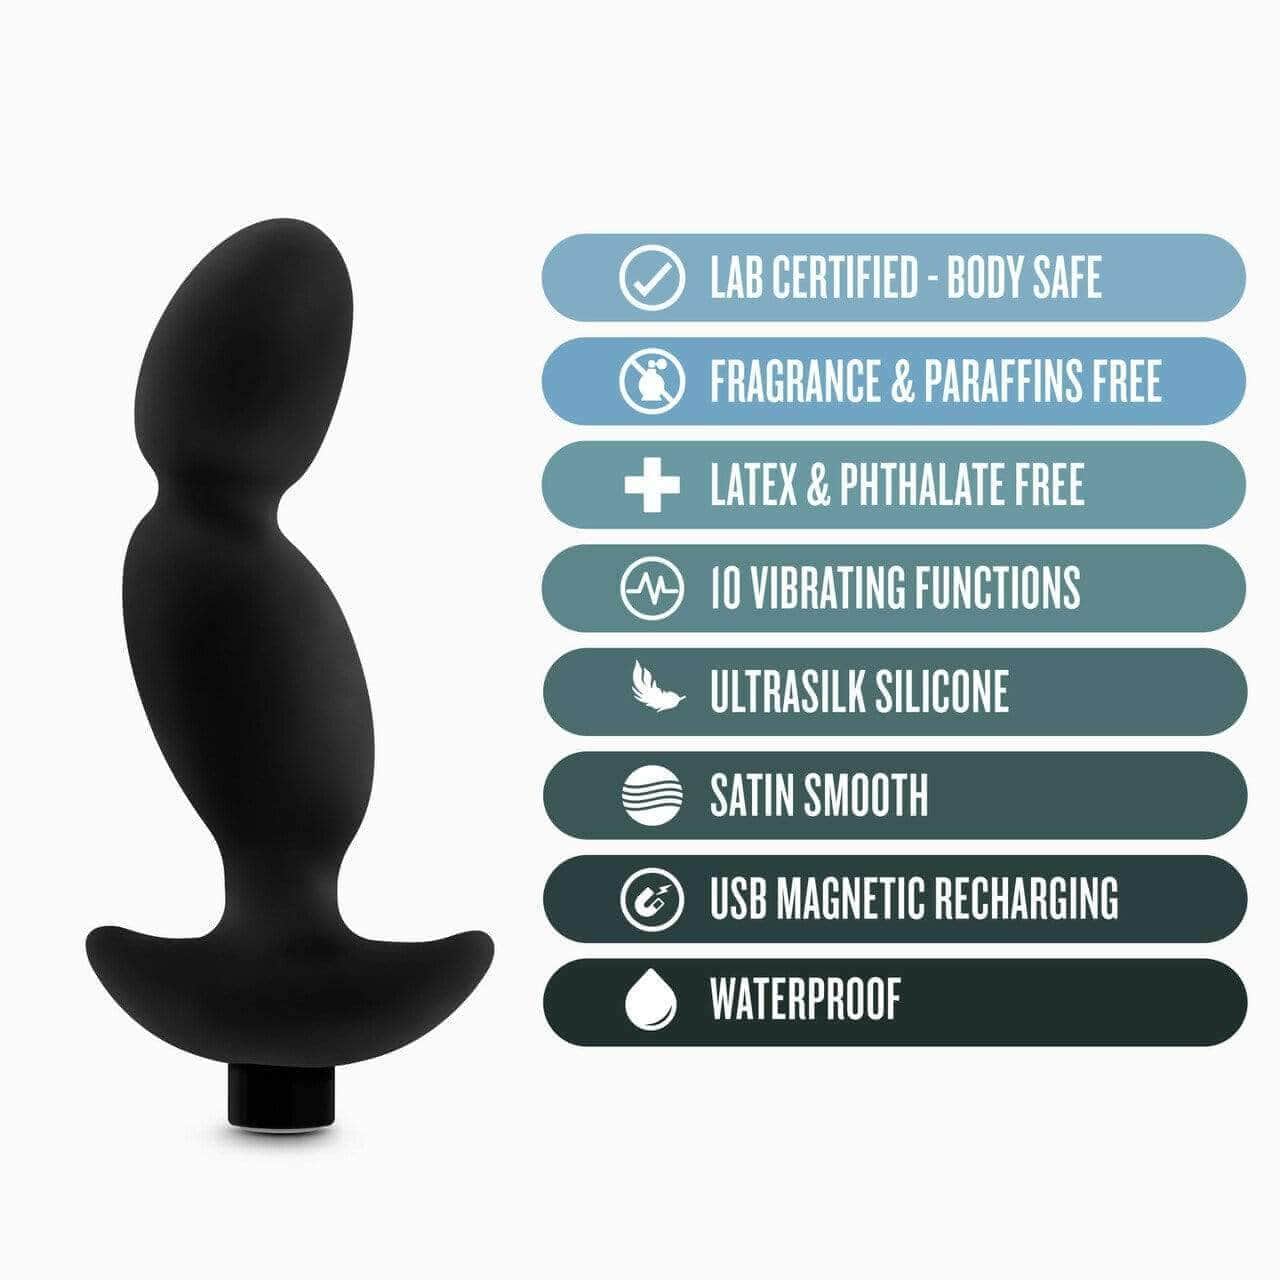 Silicone Vibrating Prostate Massager 04 - Black - Thorn & Feather